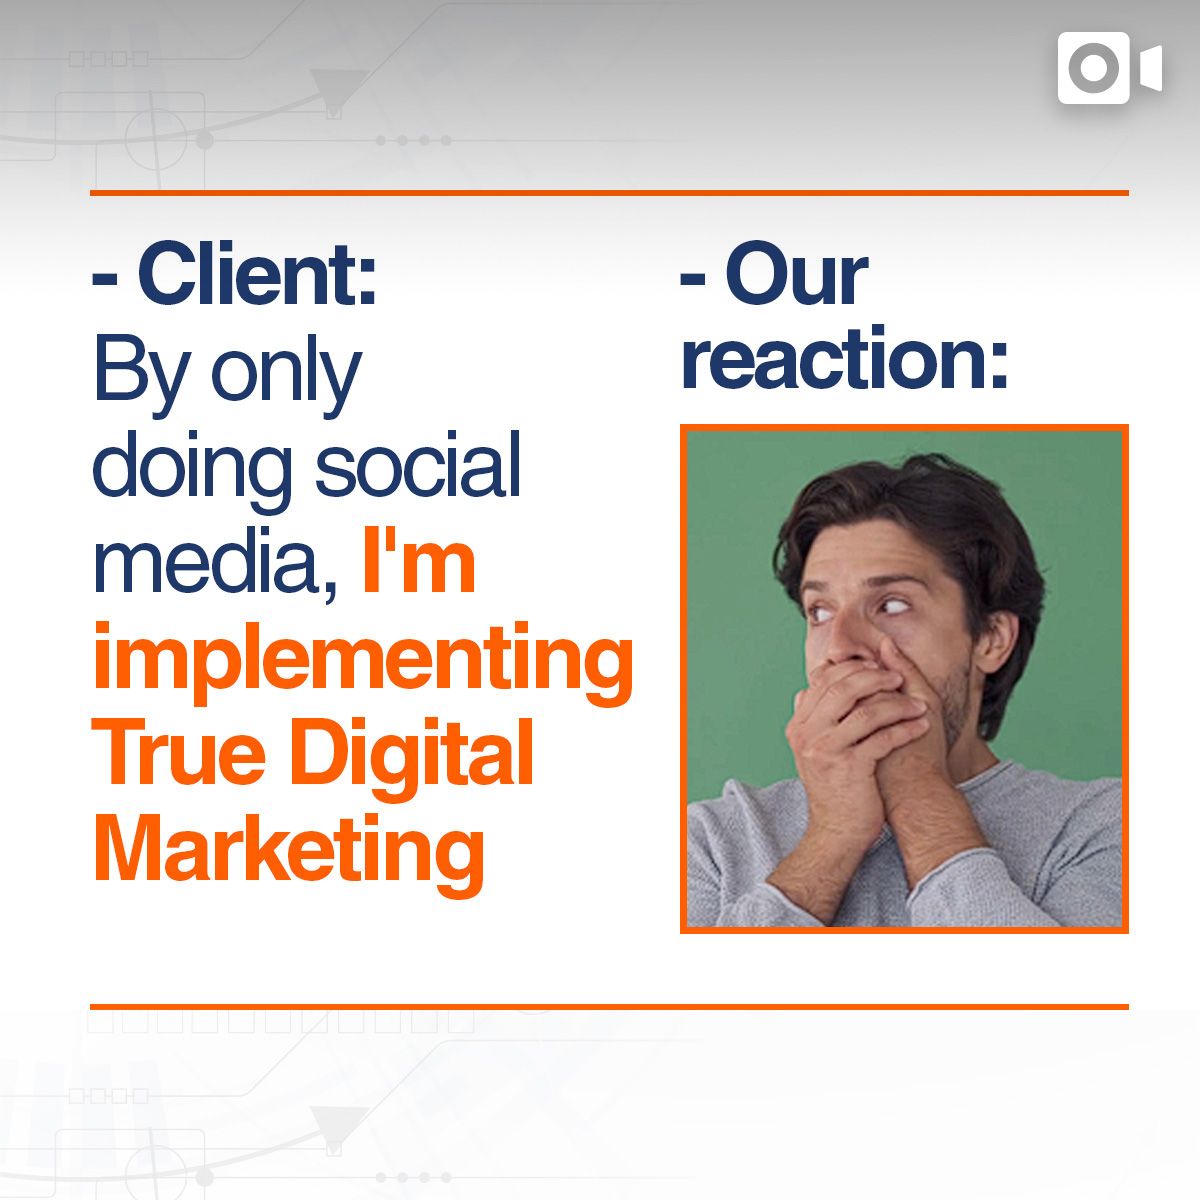 -Client: By doing only social media, I'm implementing True Digital Marketing